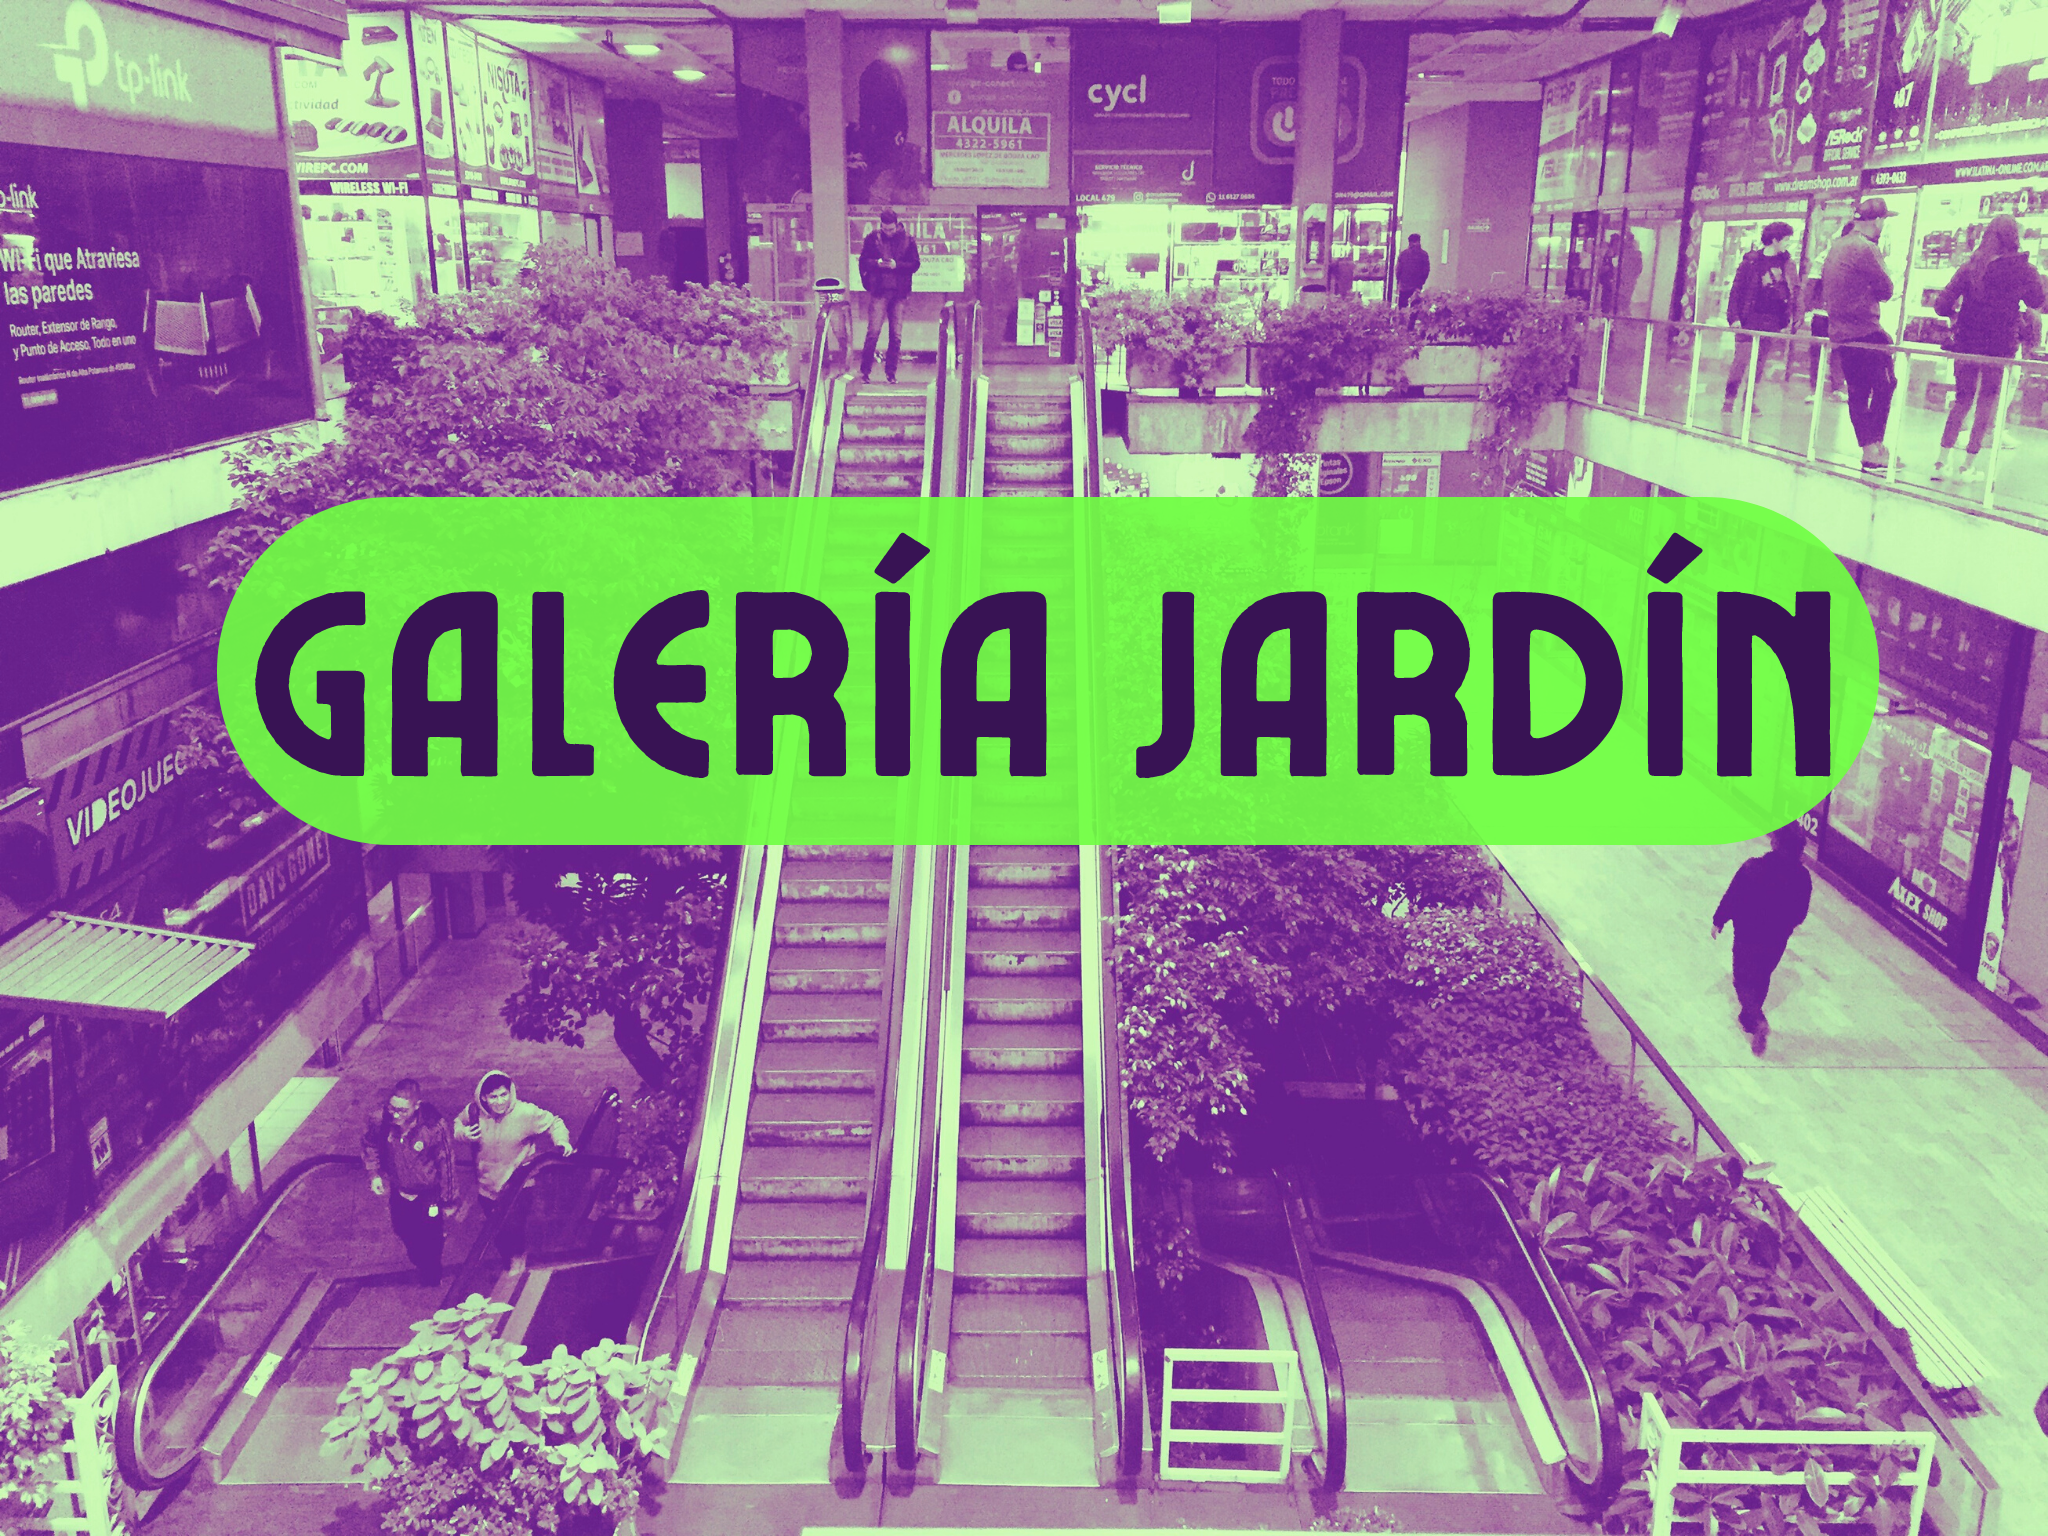 Galería Jardin (picture of shopping galler)